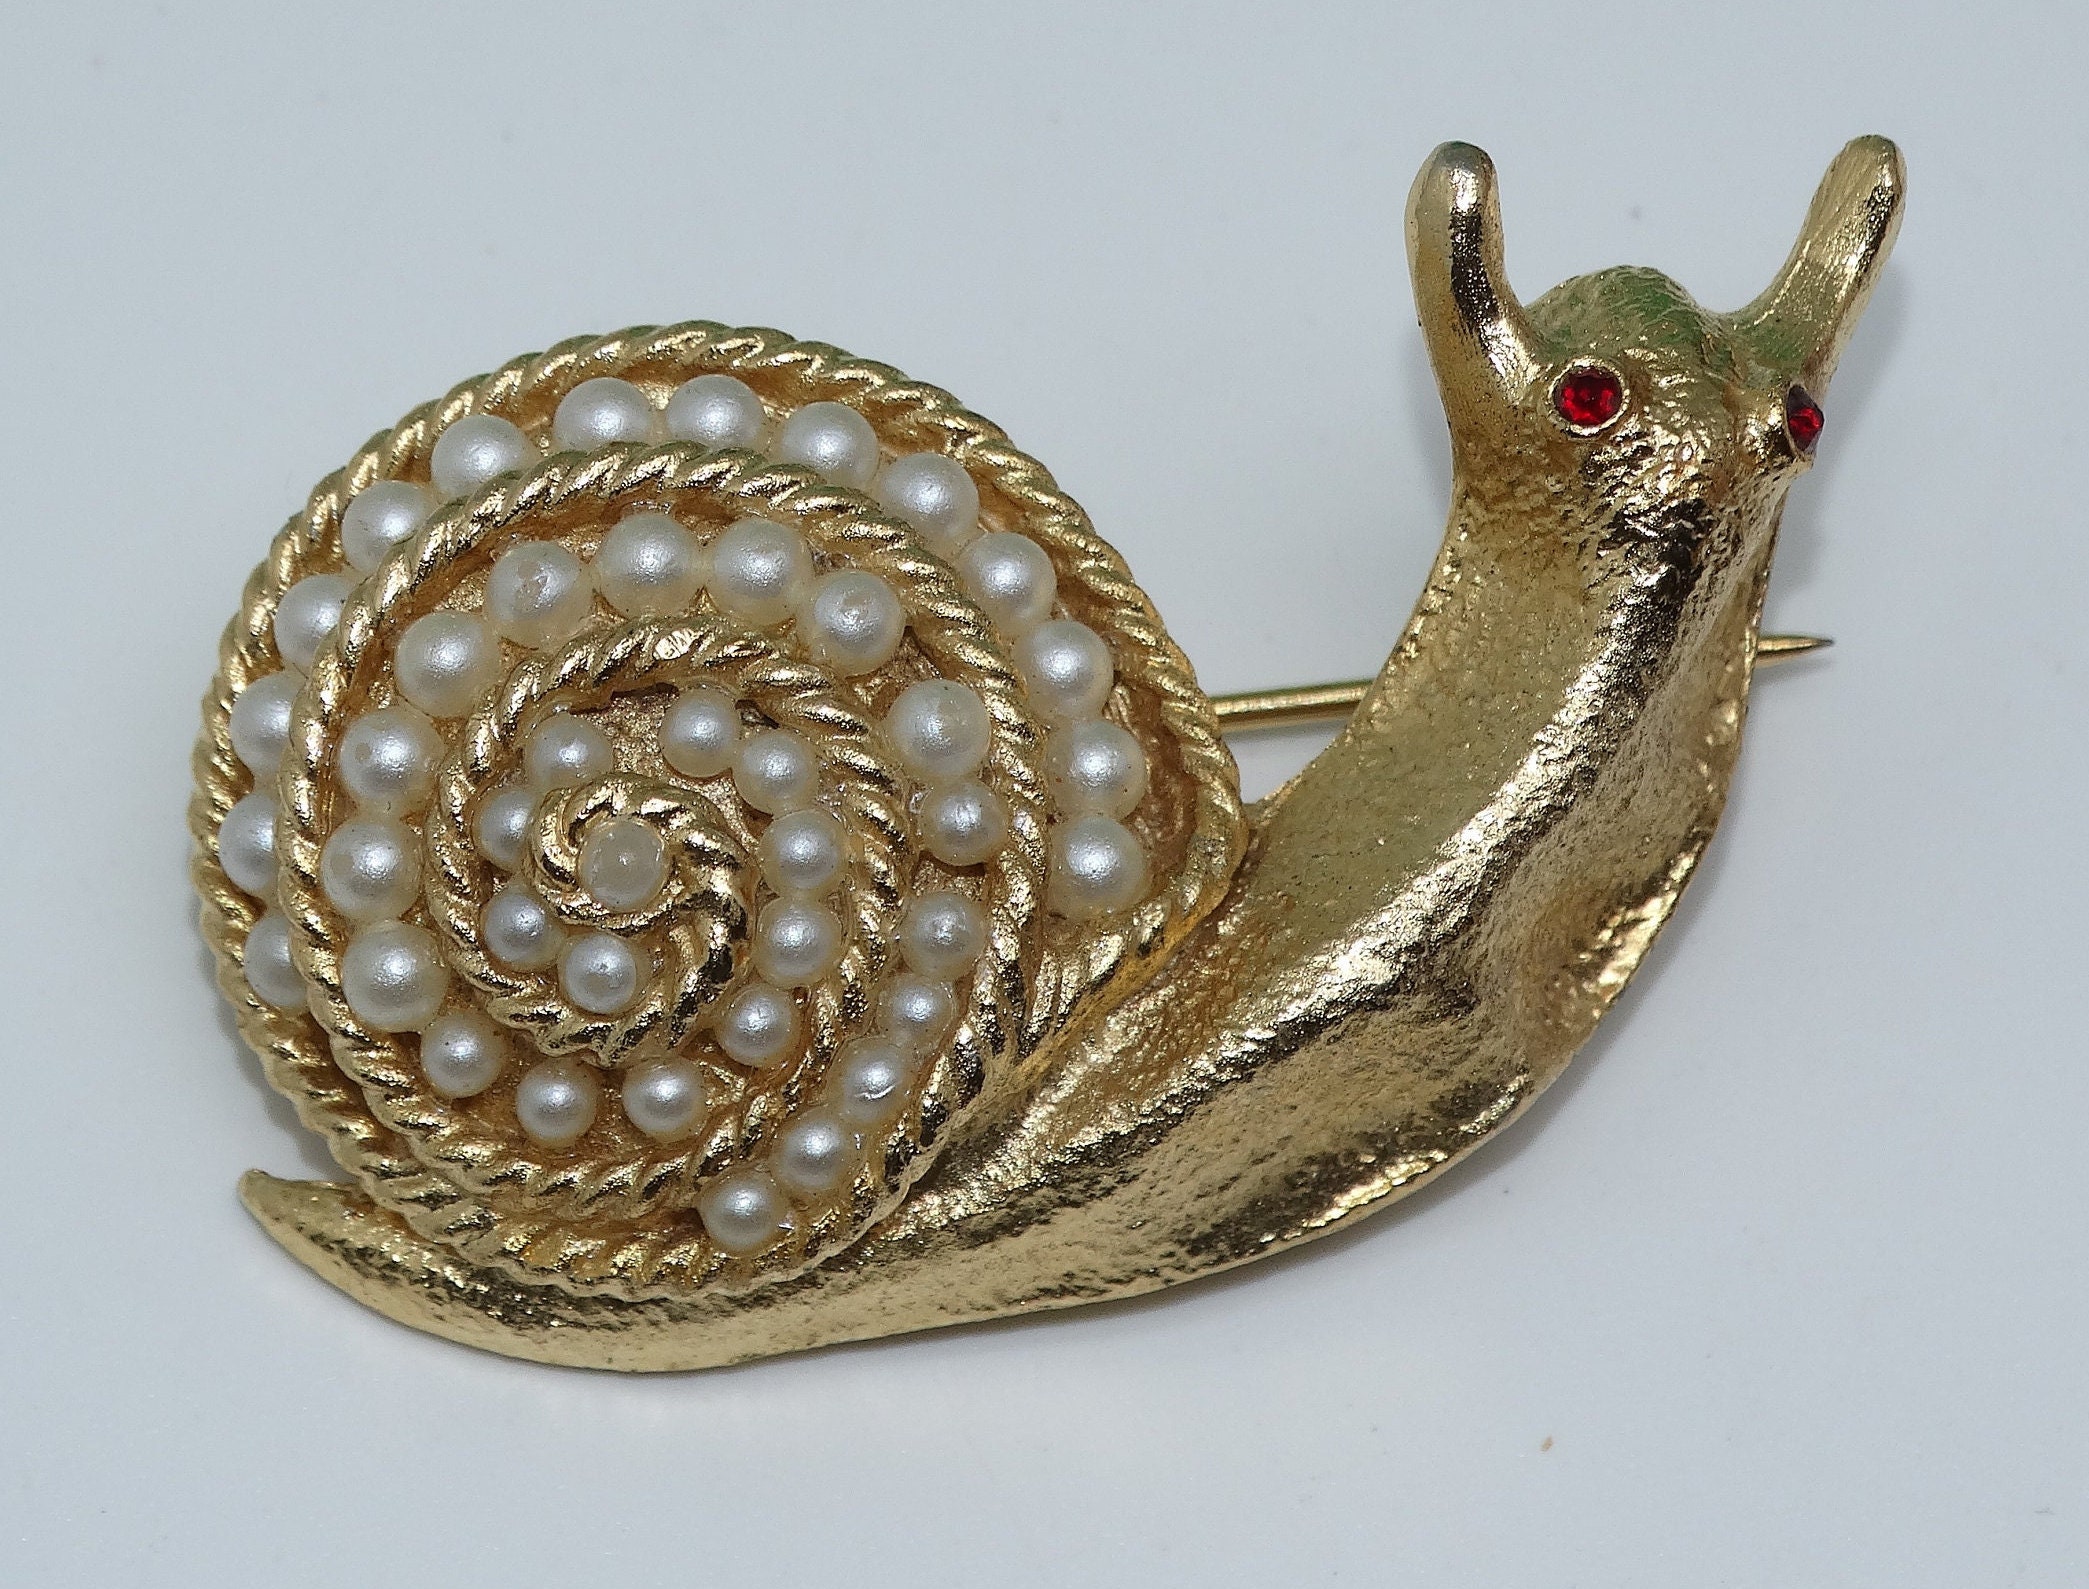 Purple Enamel Snail Brooch Cute Insect Decorative Pin For Women And Men  Crystal Bijouterie Animal Conch Piercing Jewelry Gift From Royaldavid,  $11.25